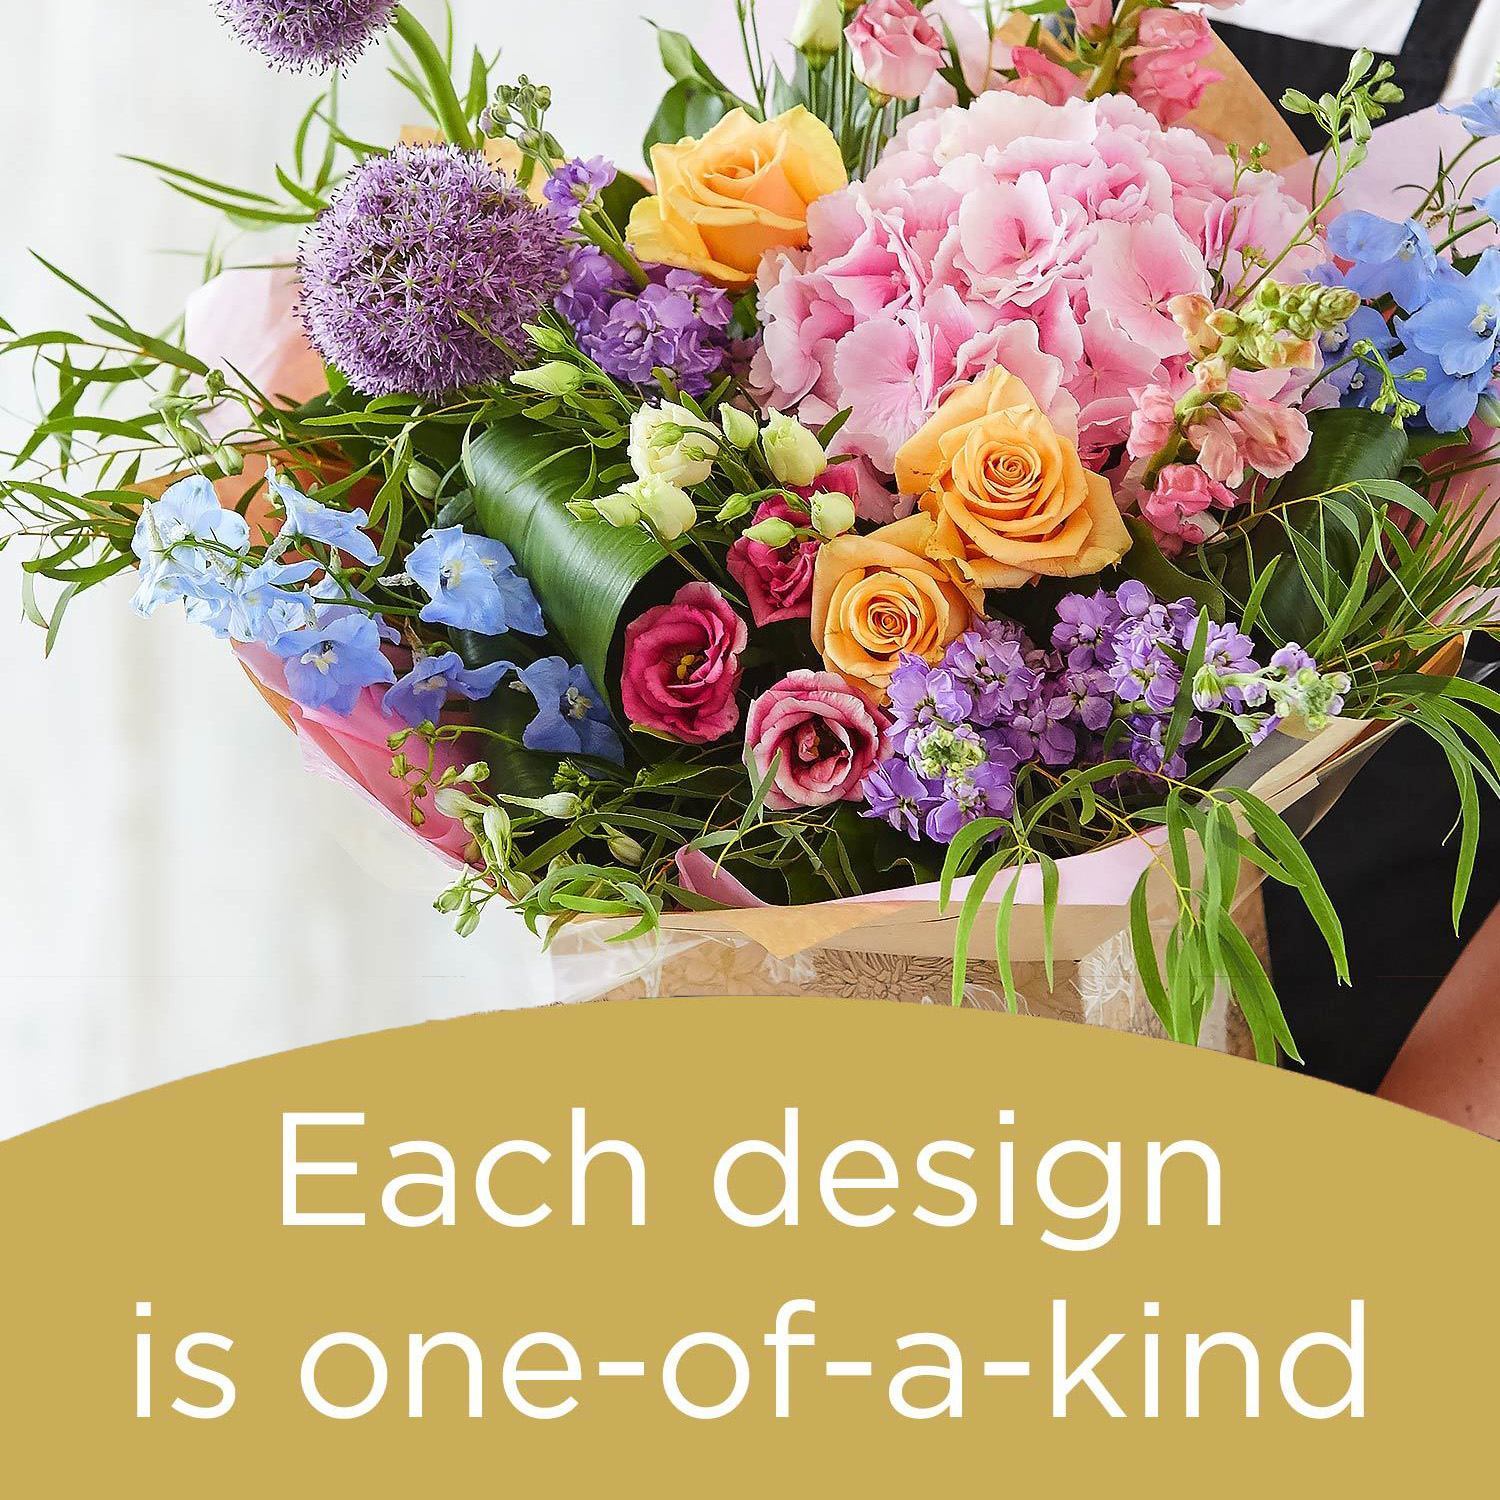 Large Bright Hand-tied bouquet made with the finest flowers